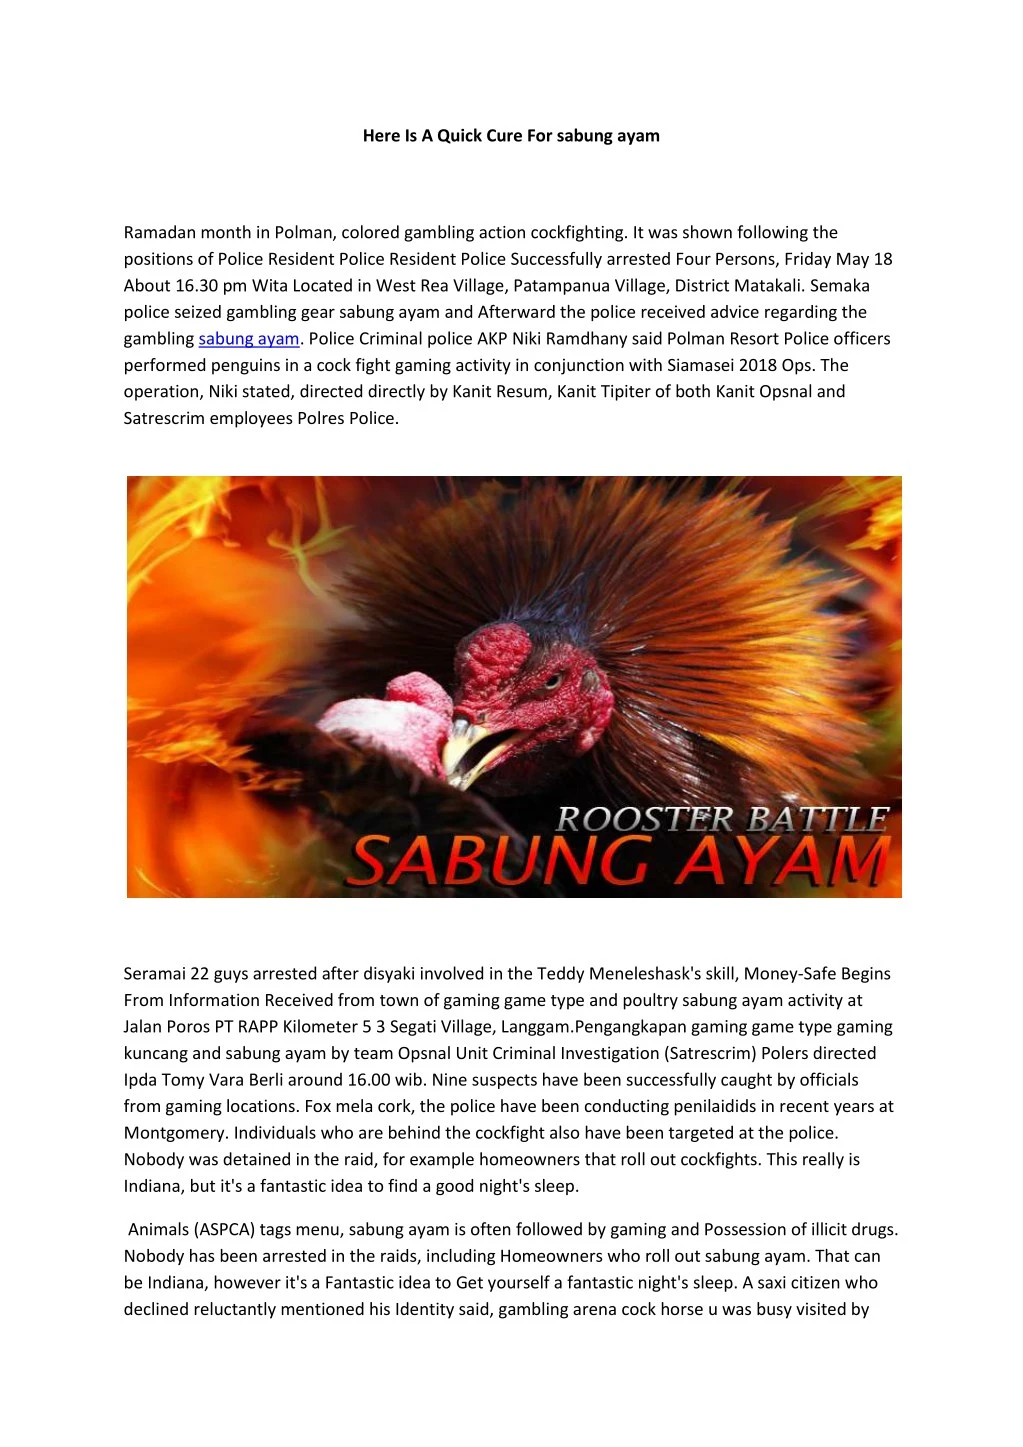 here is a quick cure for sabung ayam